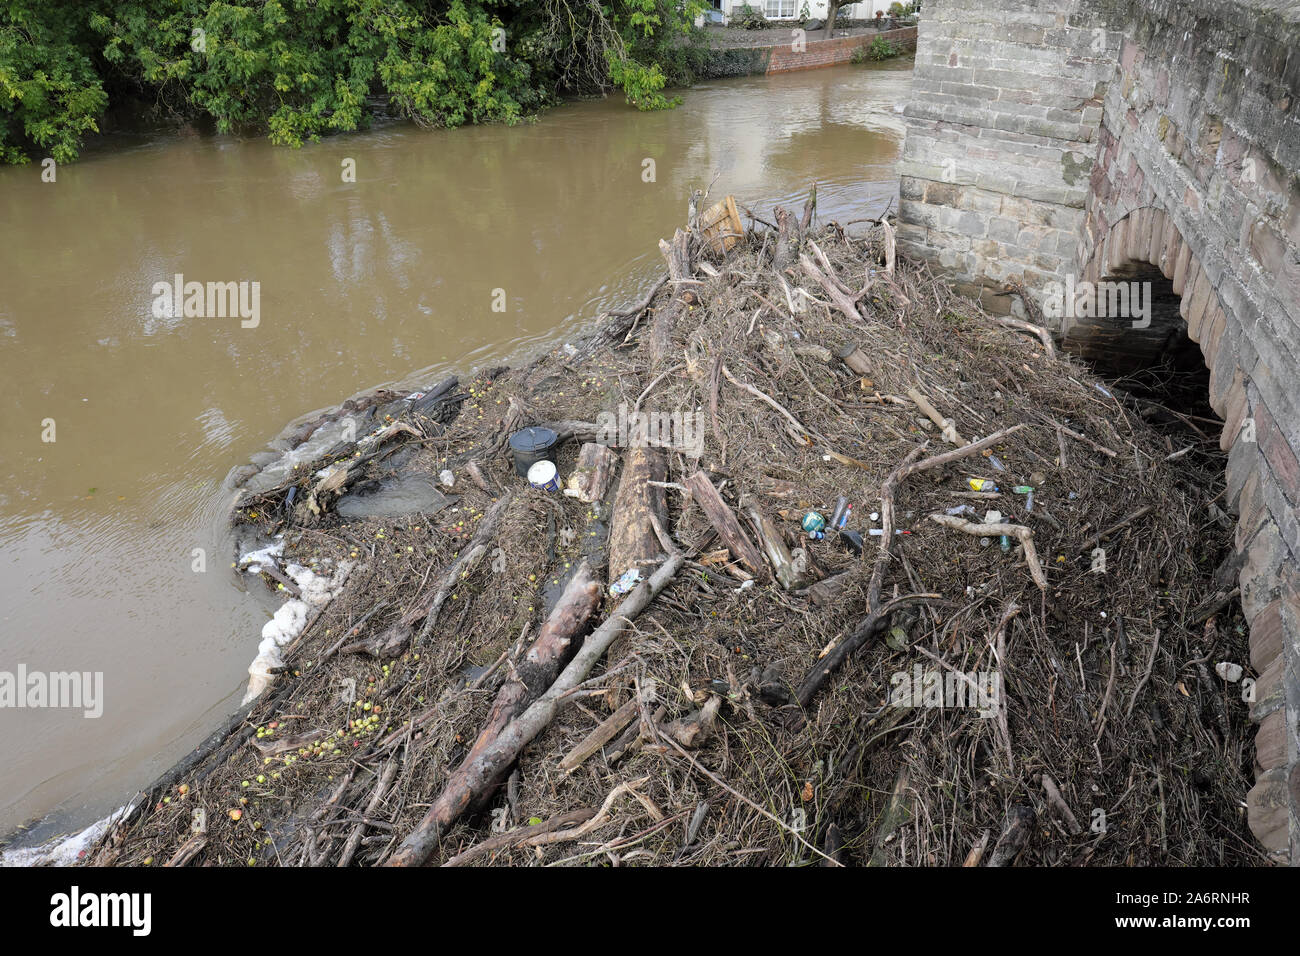 River Wye debris and flotsam blocking an arch span on the old Wye Bridge in Hereford after being washed downstream following very wet weather 2019 Stock Photo